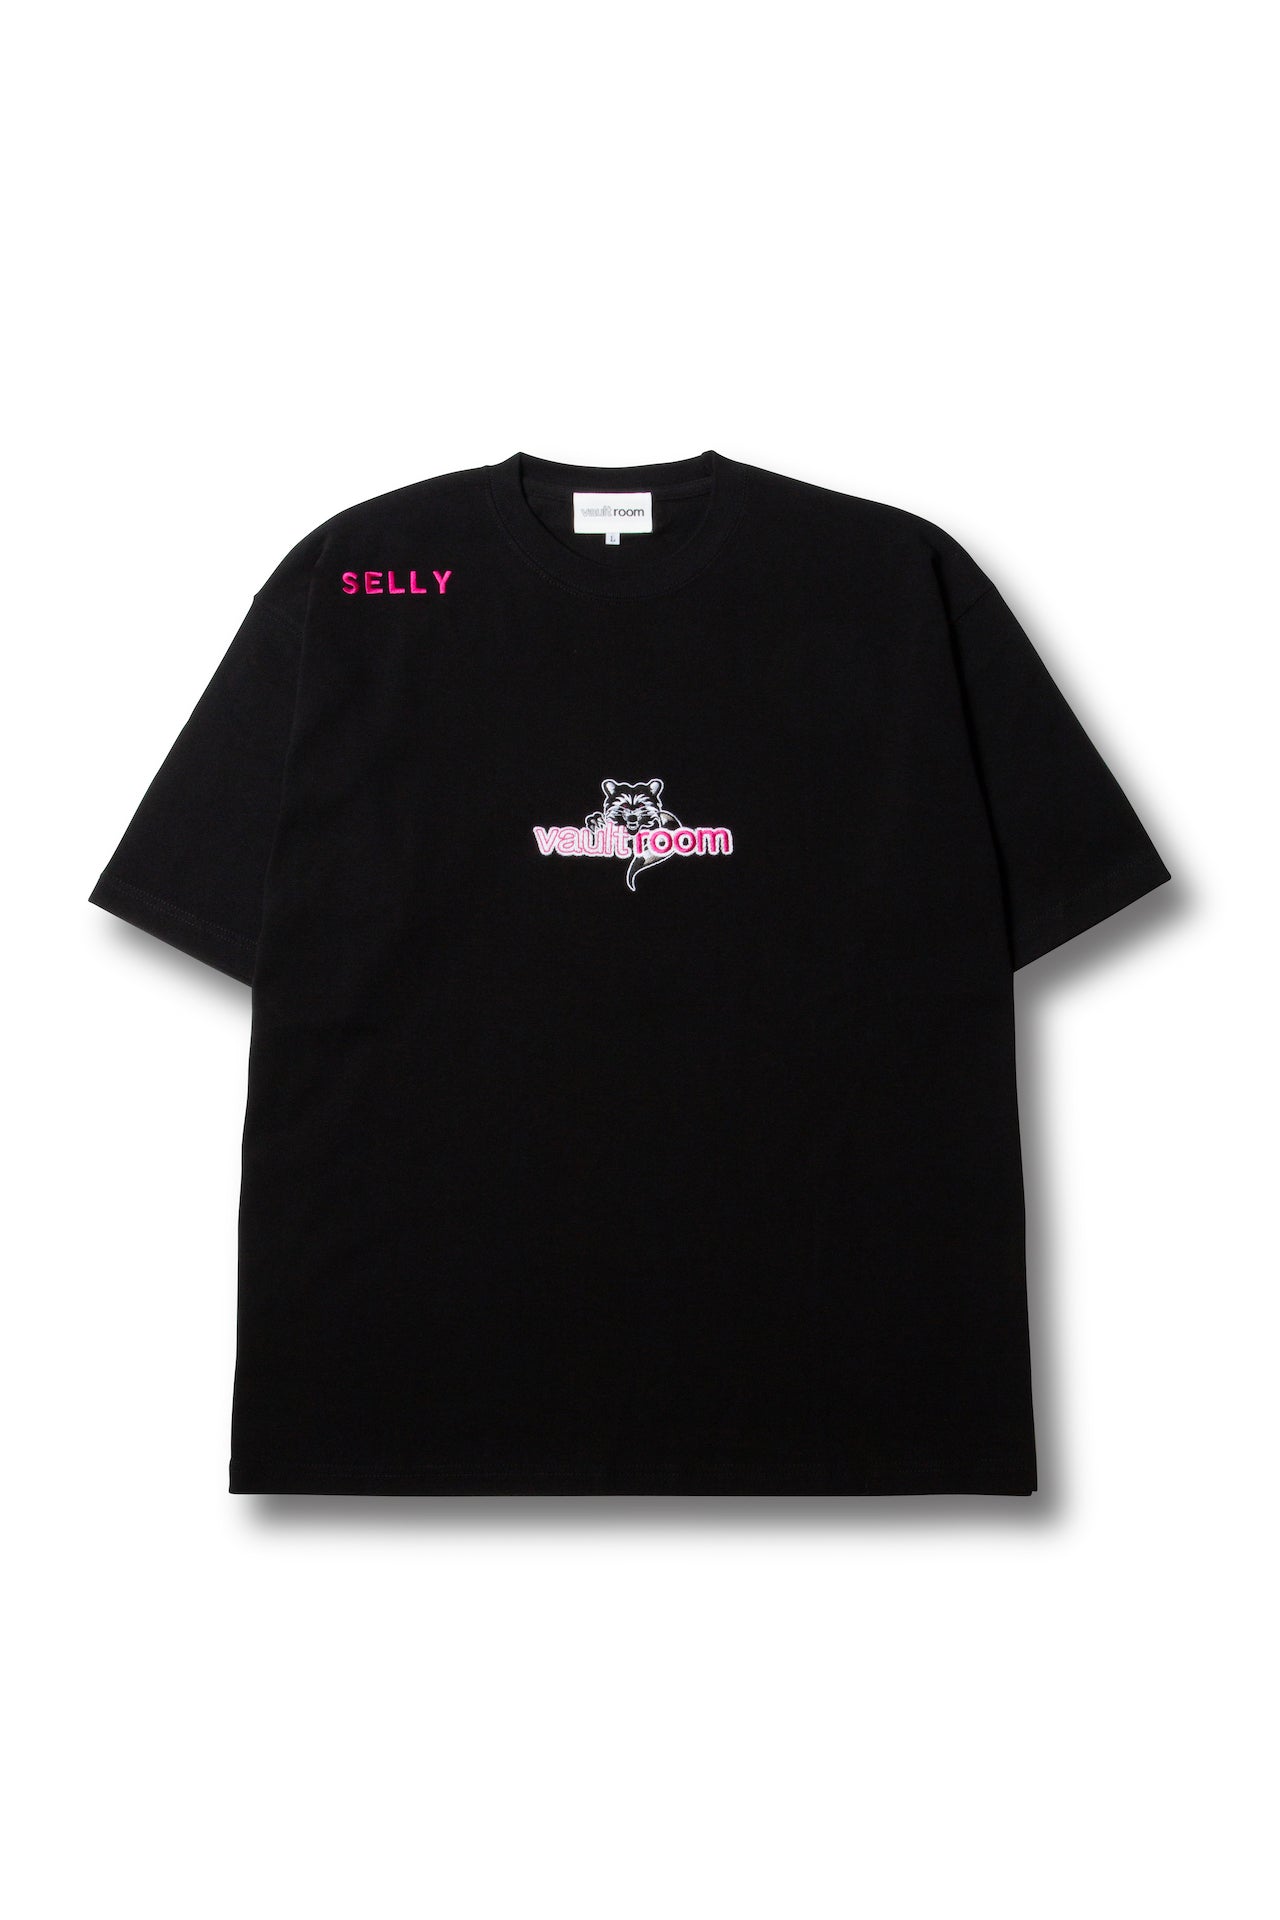 vaultroom × Selly / BLK